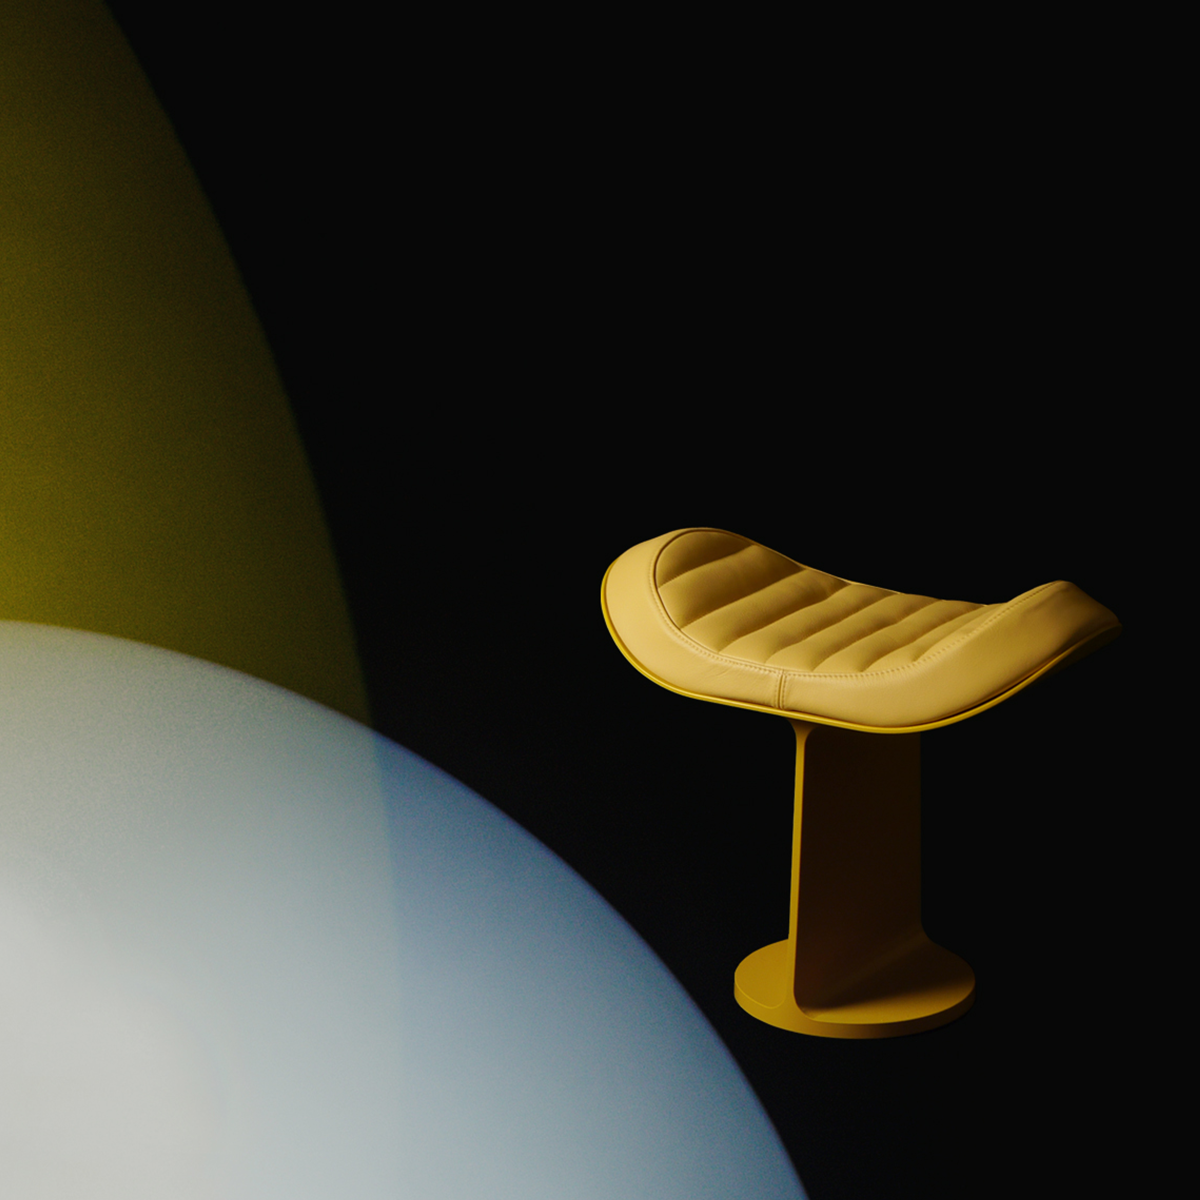 H.E.A.310 leather upholstered stool in yellow by Christophe de la Fontaine for Dante - Goods and Bads